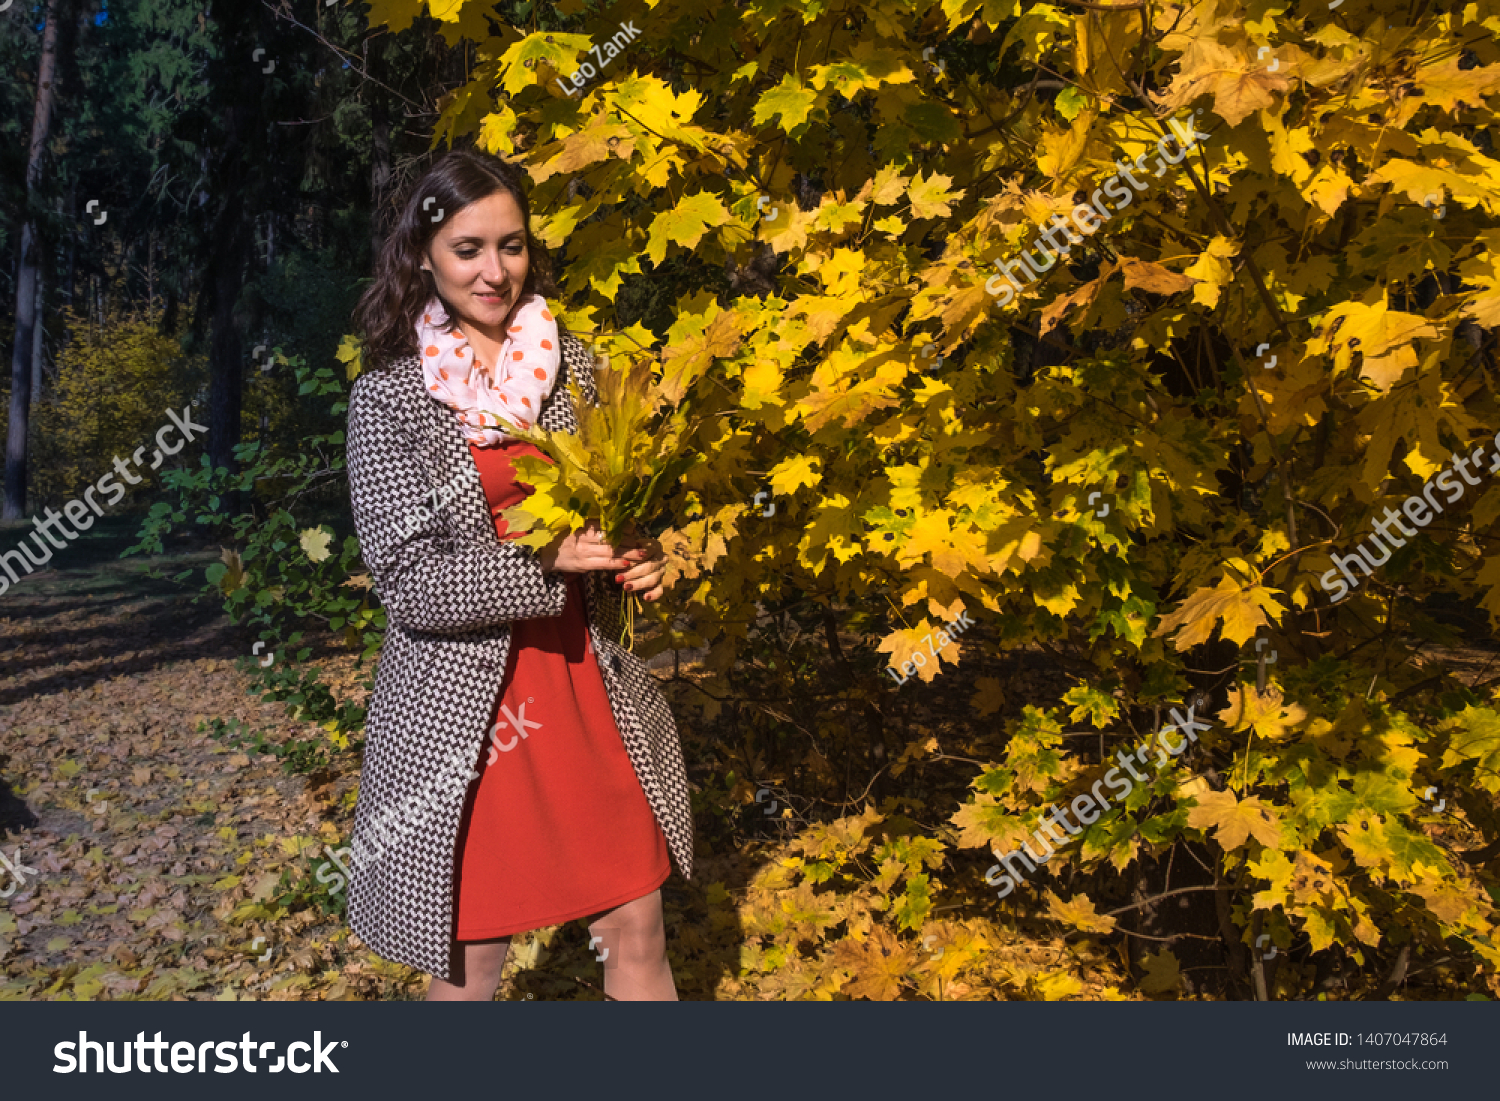 Young woman wearing gray coat and red dress having fun in autumn park and holding yellow maple leaves in hands. Happy girl enjoying weekend outdoor walking. Sunny day and fall nature on background.  #1407047864